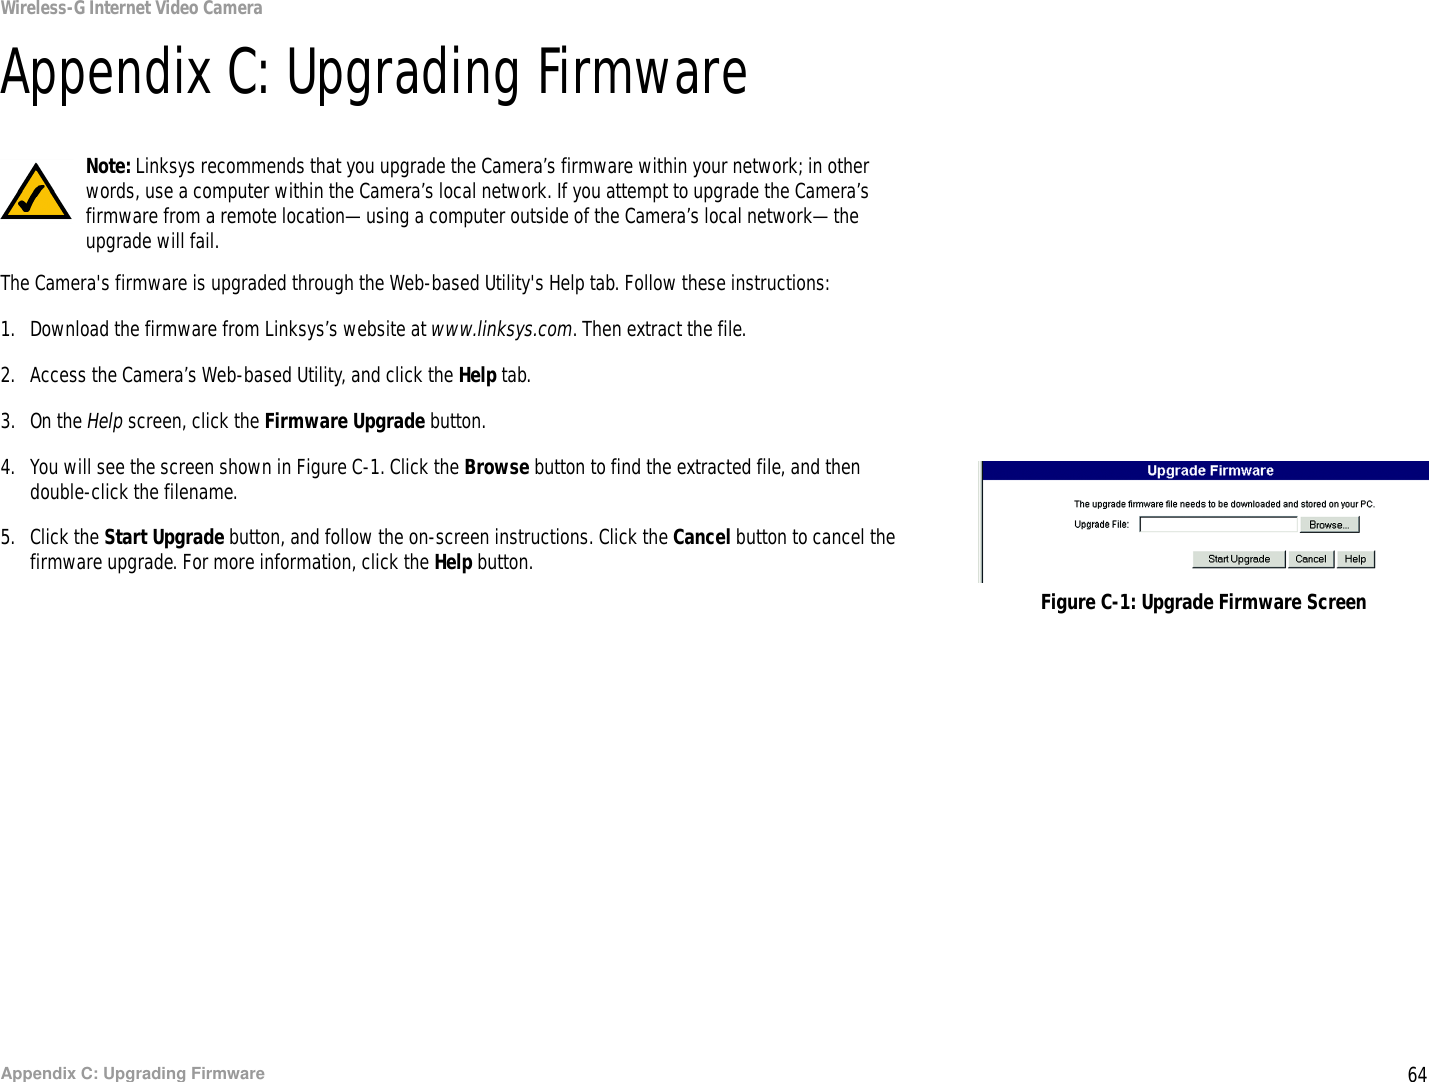 64Appendix C: Upgrading FirmwareWireless-G Internet Video CameraAppendix C: Upgrading FirmwareThe Camera&apos;s firmware is upgraded through the Web-based Utility&apos;s Help tab. Follow these instructions:1. Download the firmware from Linksys’s website at www.linksys.com. Then extract the file.2. Access the Camera’s Web-based Utility, and click the Help tab.3. On the Help screen, click the Firmware Upgrade button.4. You will see the screen shown in Figure C-1. Click the Browse button to find the extracted file, and then double-click the filename.5. Click the Start Upgrade button, and follow the on-screen instructions. Click the Cancel button to cancel the firmware upgrade. For more information, click the Help button.Figure C-1: Upgrade Firmware ScreenNote: Linksys recommends that you upgrade the Camera’s firmware within your network; in other words, use a computer within the Camera’s local network. If you attempt to upgrade the Camera’s firmware from a remote location—using a computer outside of the Camera’s local network—the upgrade will fail.